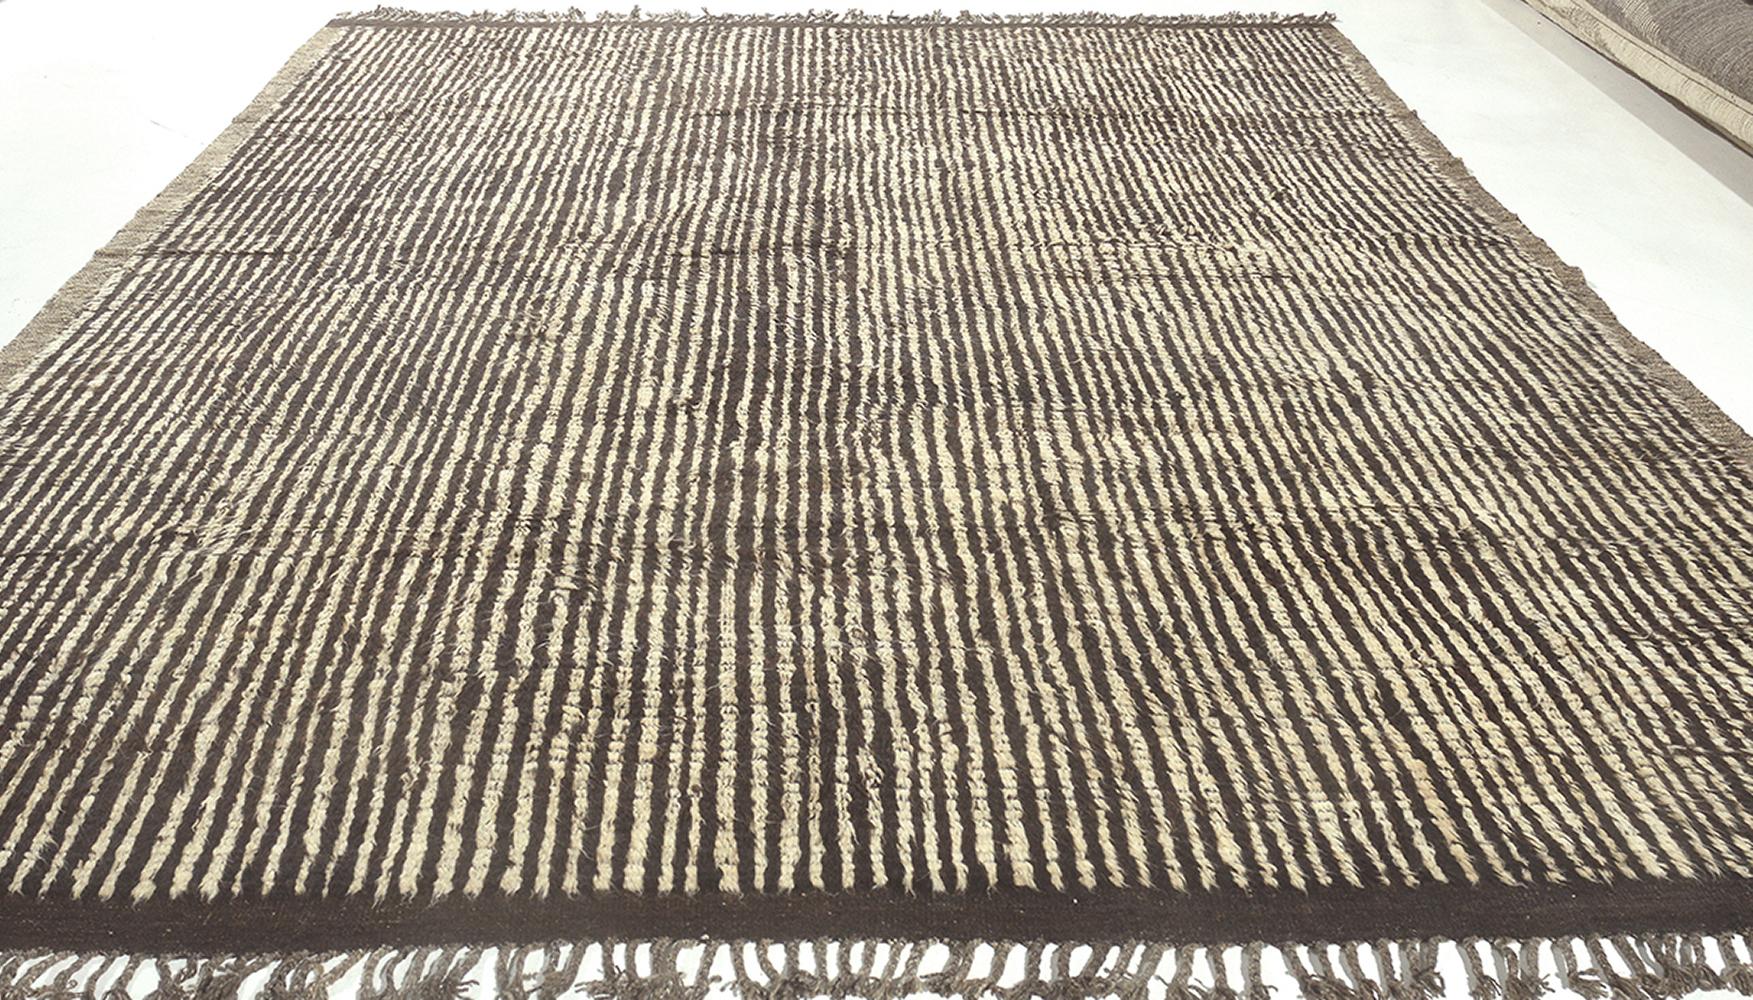 Contemporary Nazmiyal Collection Modern Boho Chic Rug. 10 ft 4 in x 13 ft 8 in